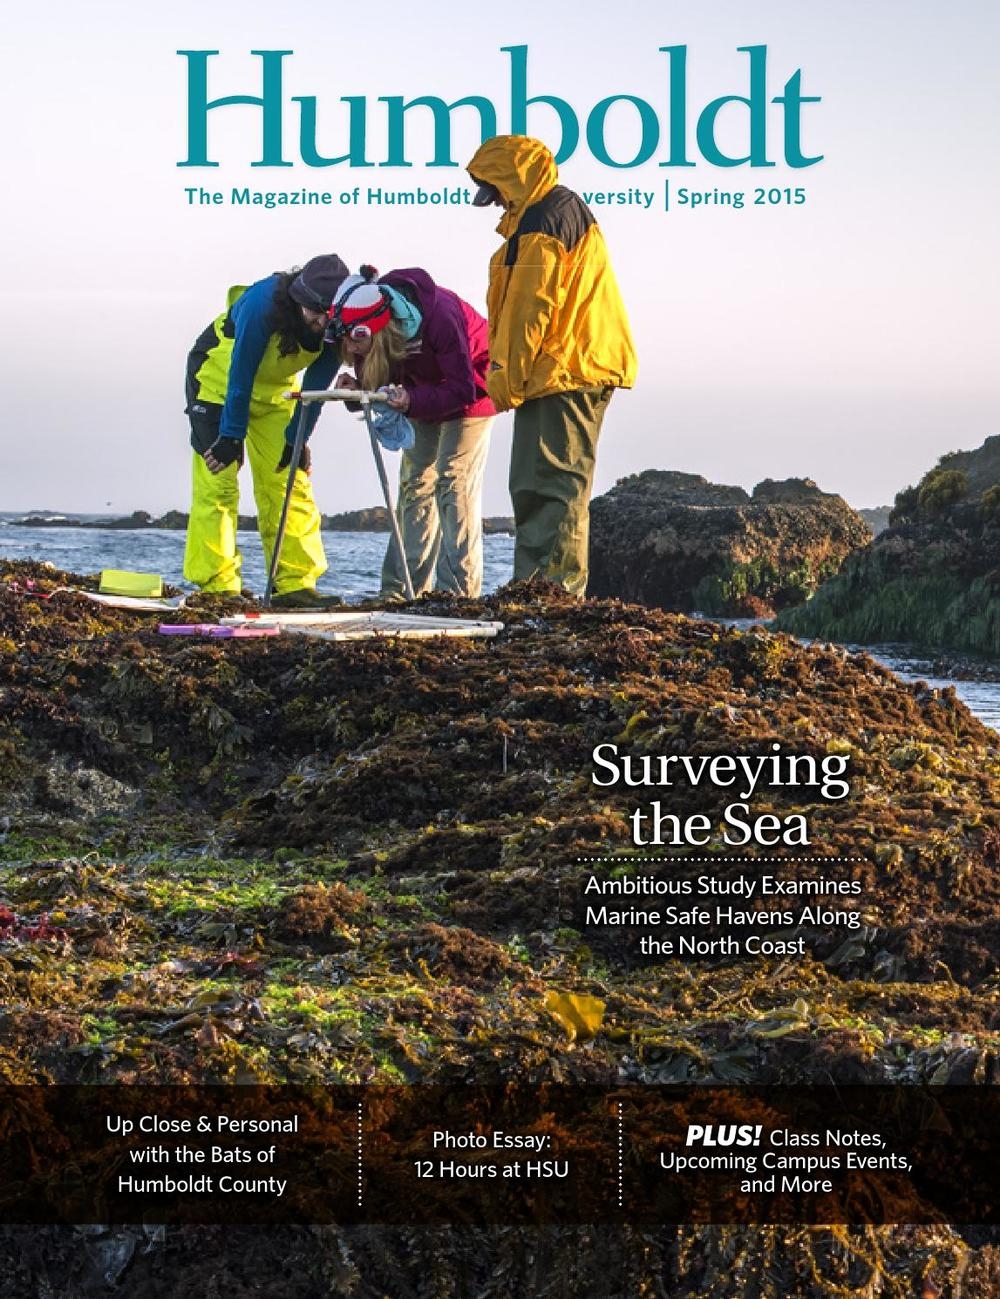 Humboldt magazine cover issue with students doing research